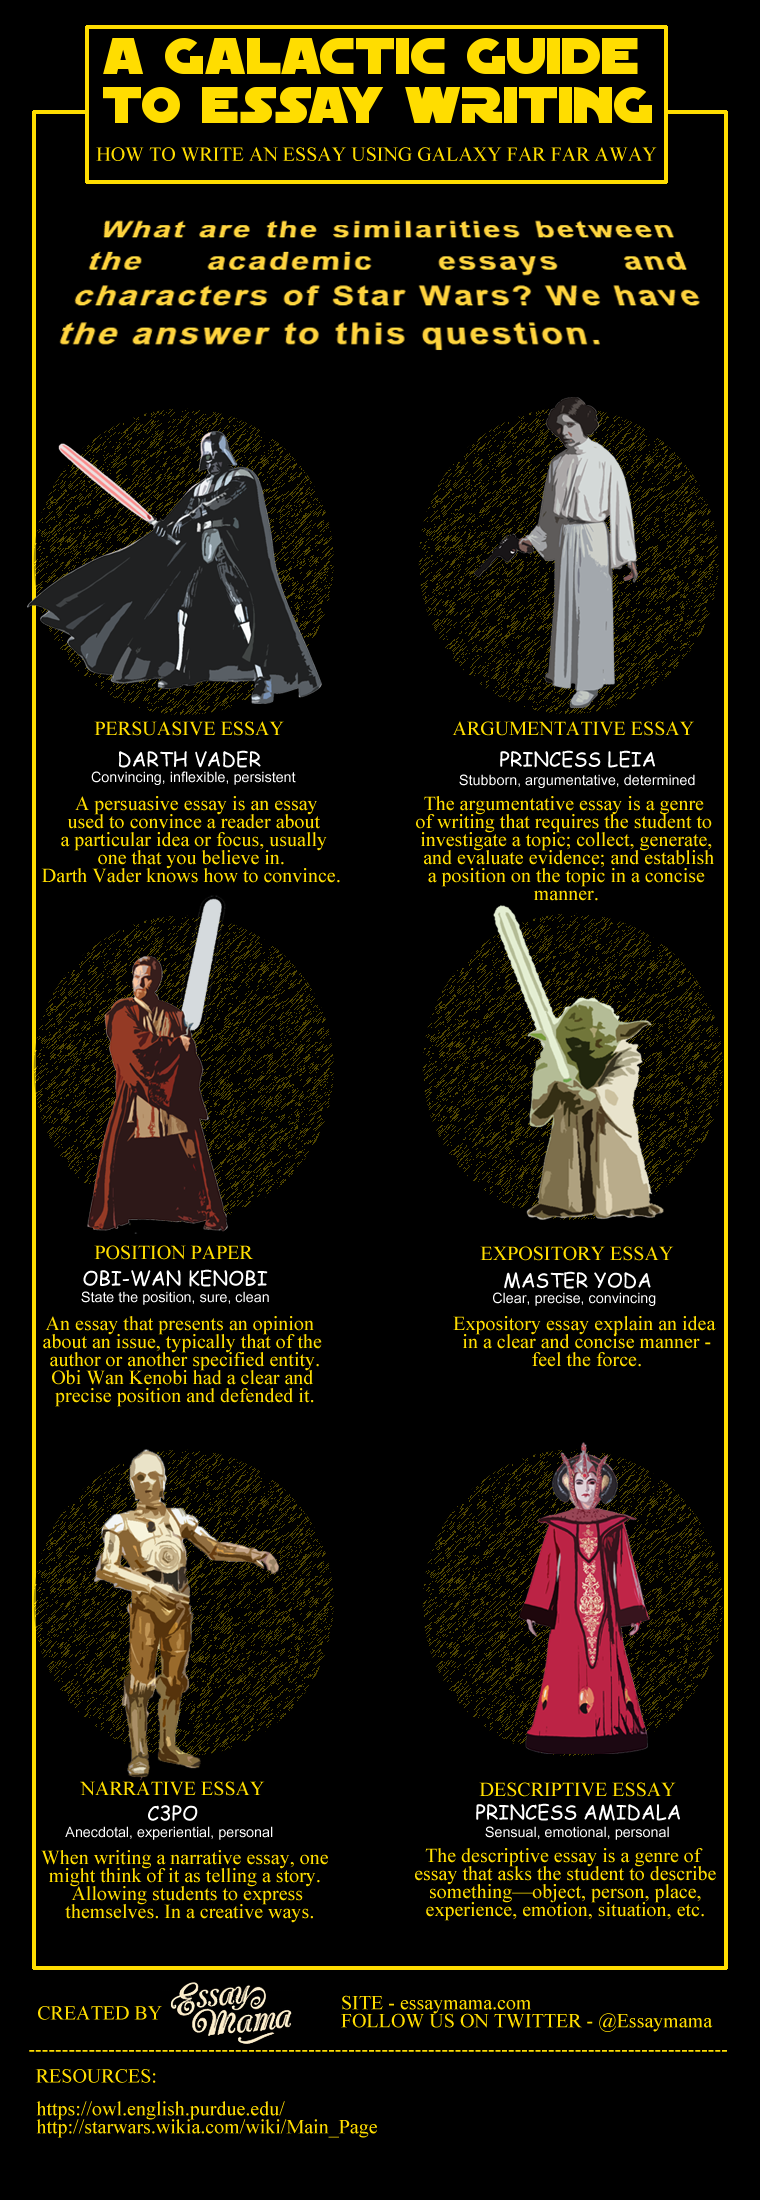 Without producing any disturbances in the force, the infographic created by EssayMama.com team shows that there is a very powerful connection between the characters of Star Wars and essay writing.